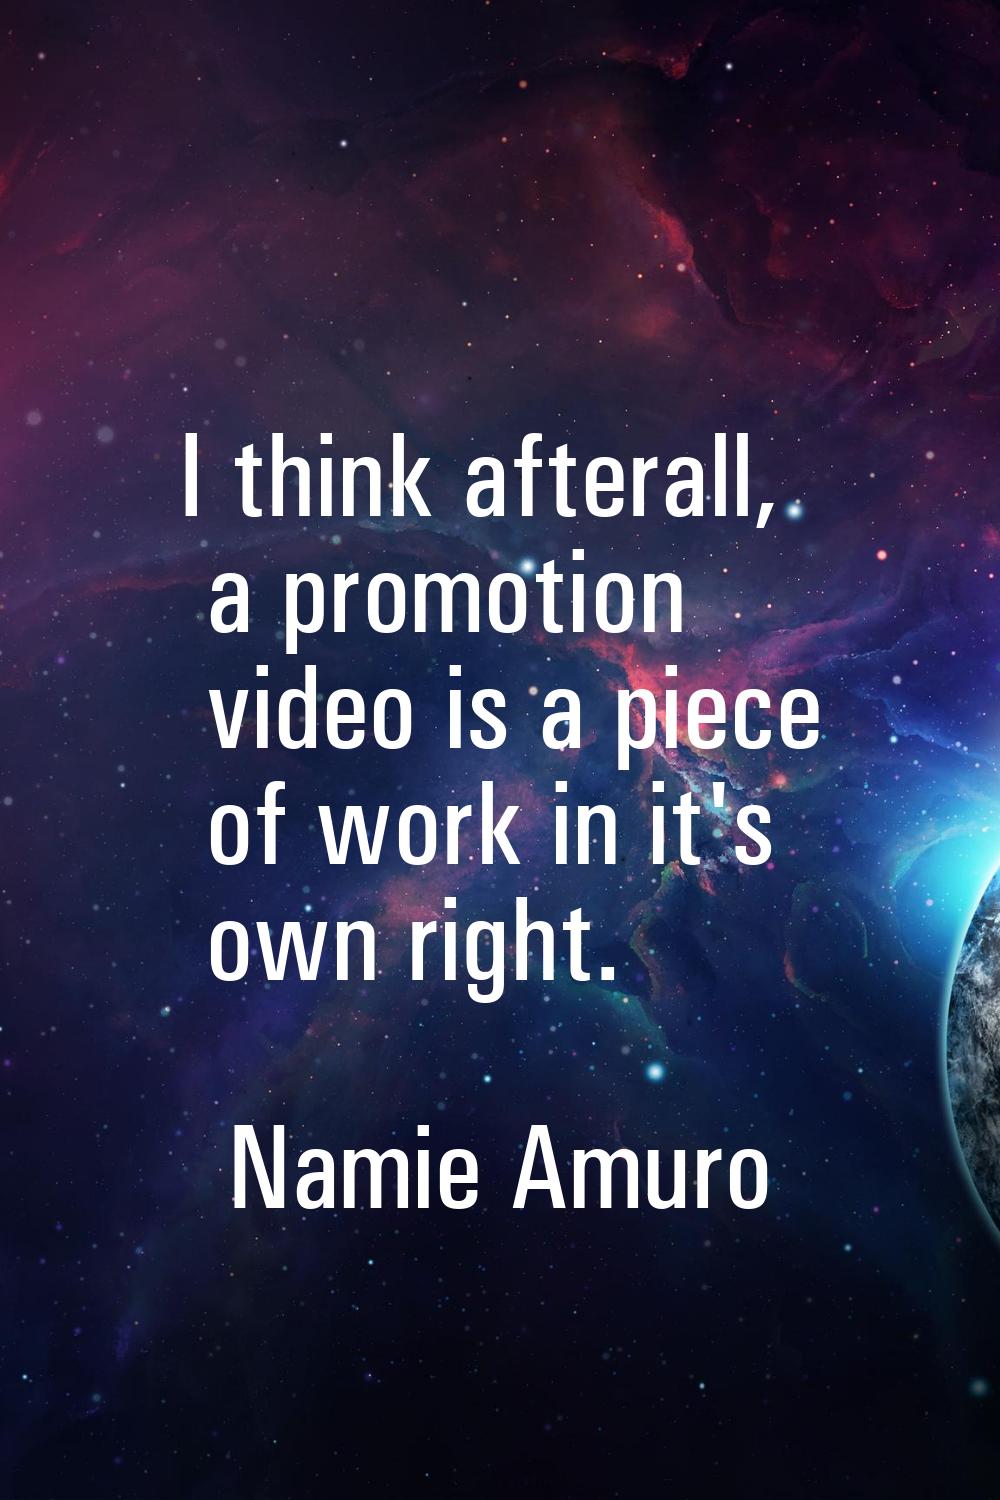 I think afterall, a promotion video is a piece of work in it's own right.